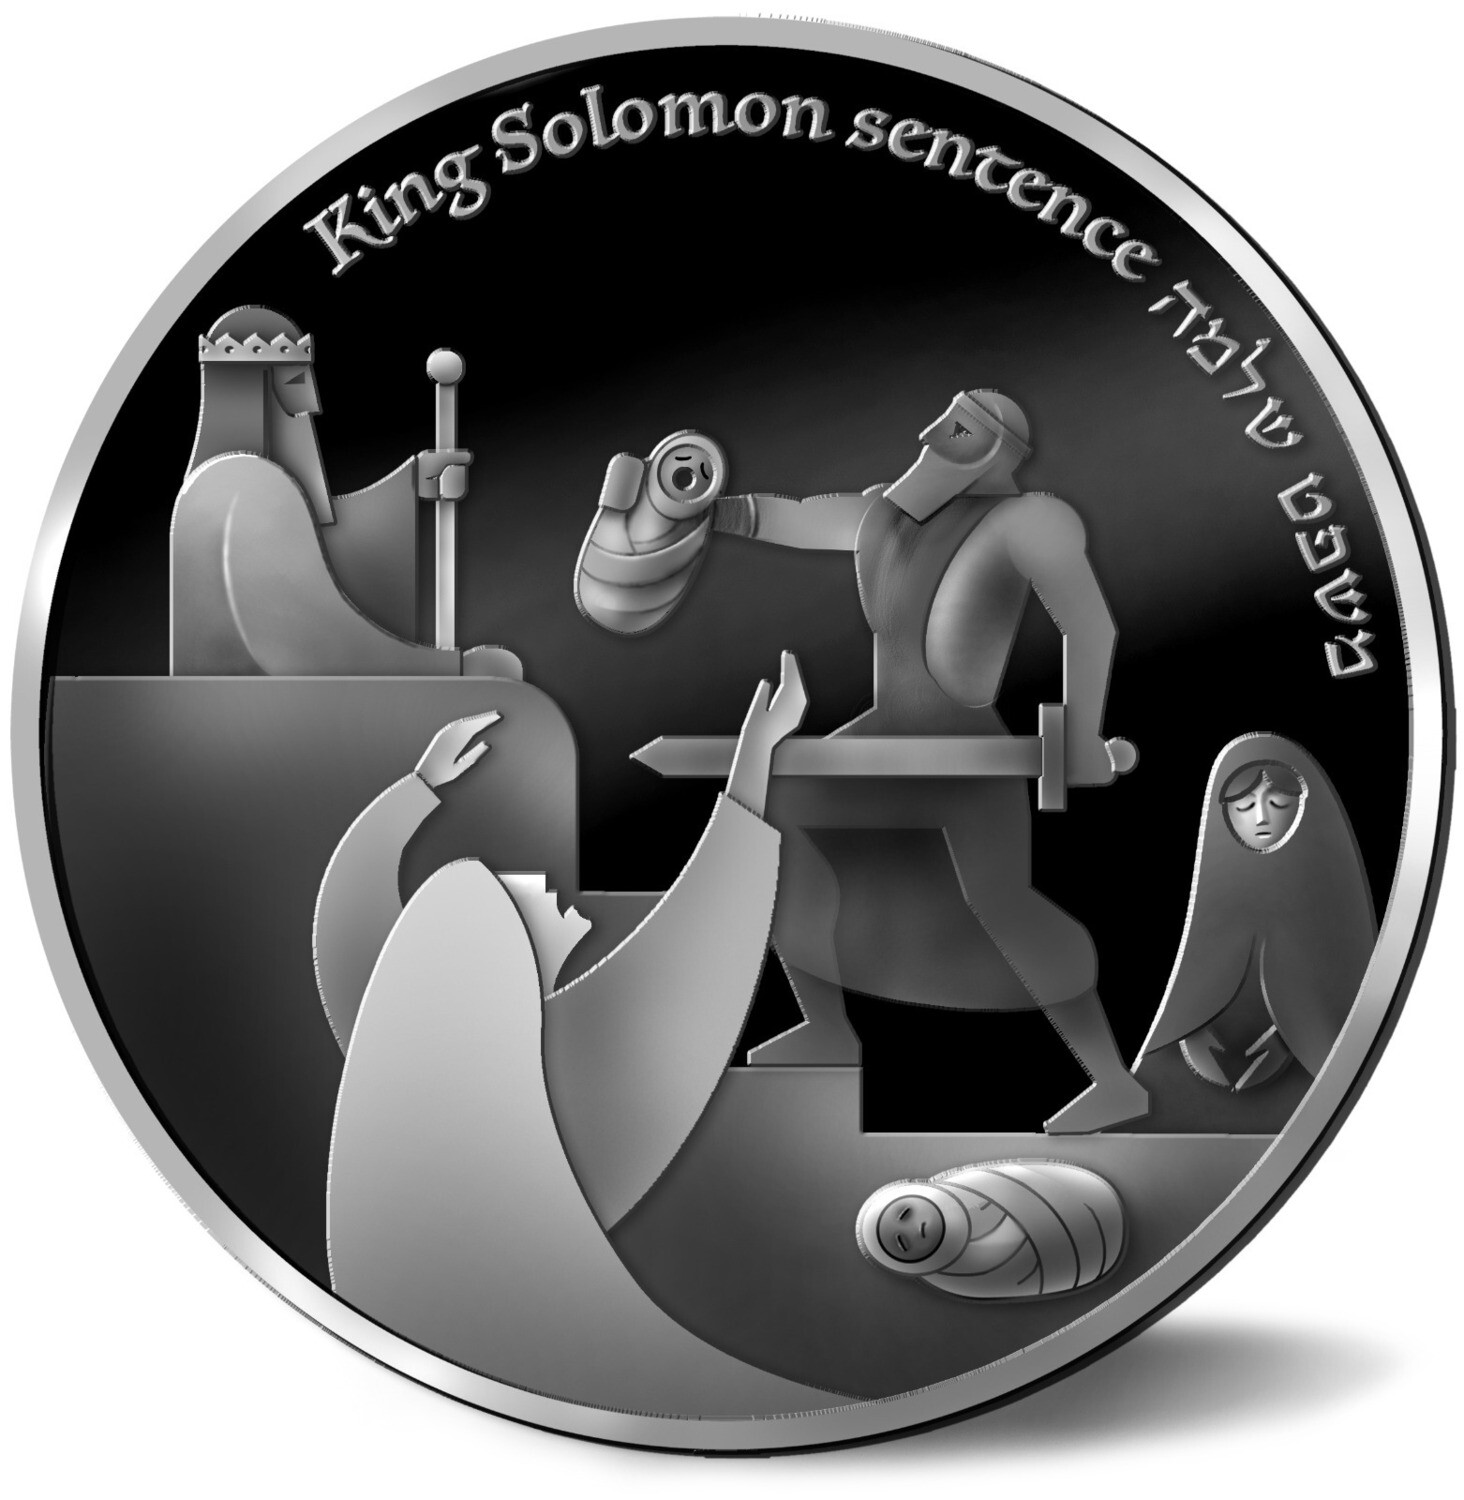 King Solomon Coin Silver Plated